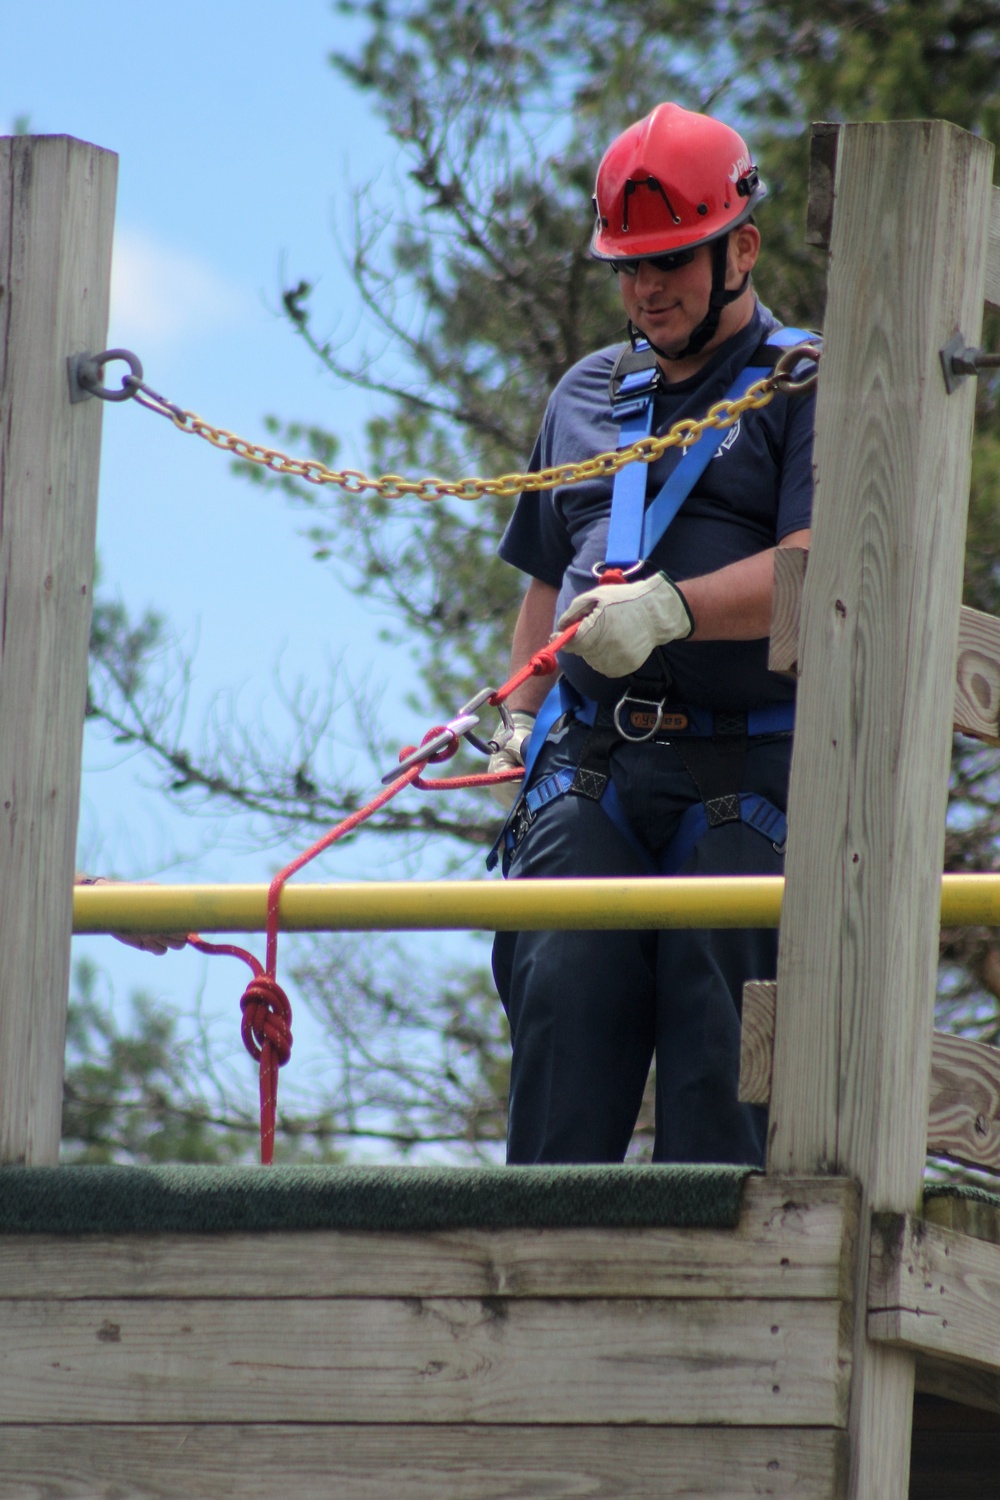 DVIDS - Images - Firefighters learn rope, rappelling skills during  technical rescue training at Fort McCoy [Image 9 of 12]